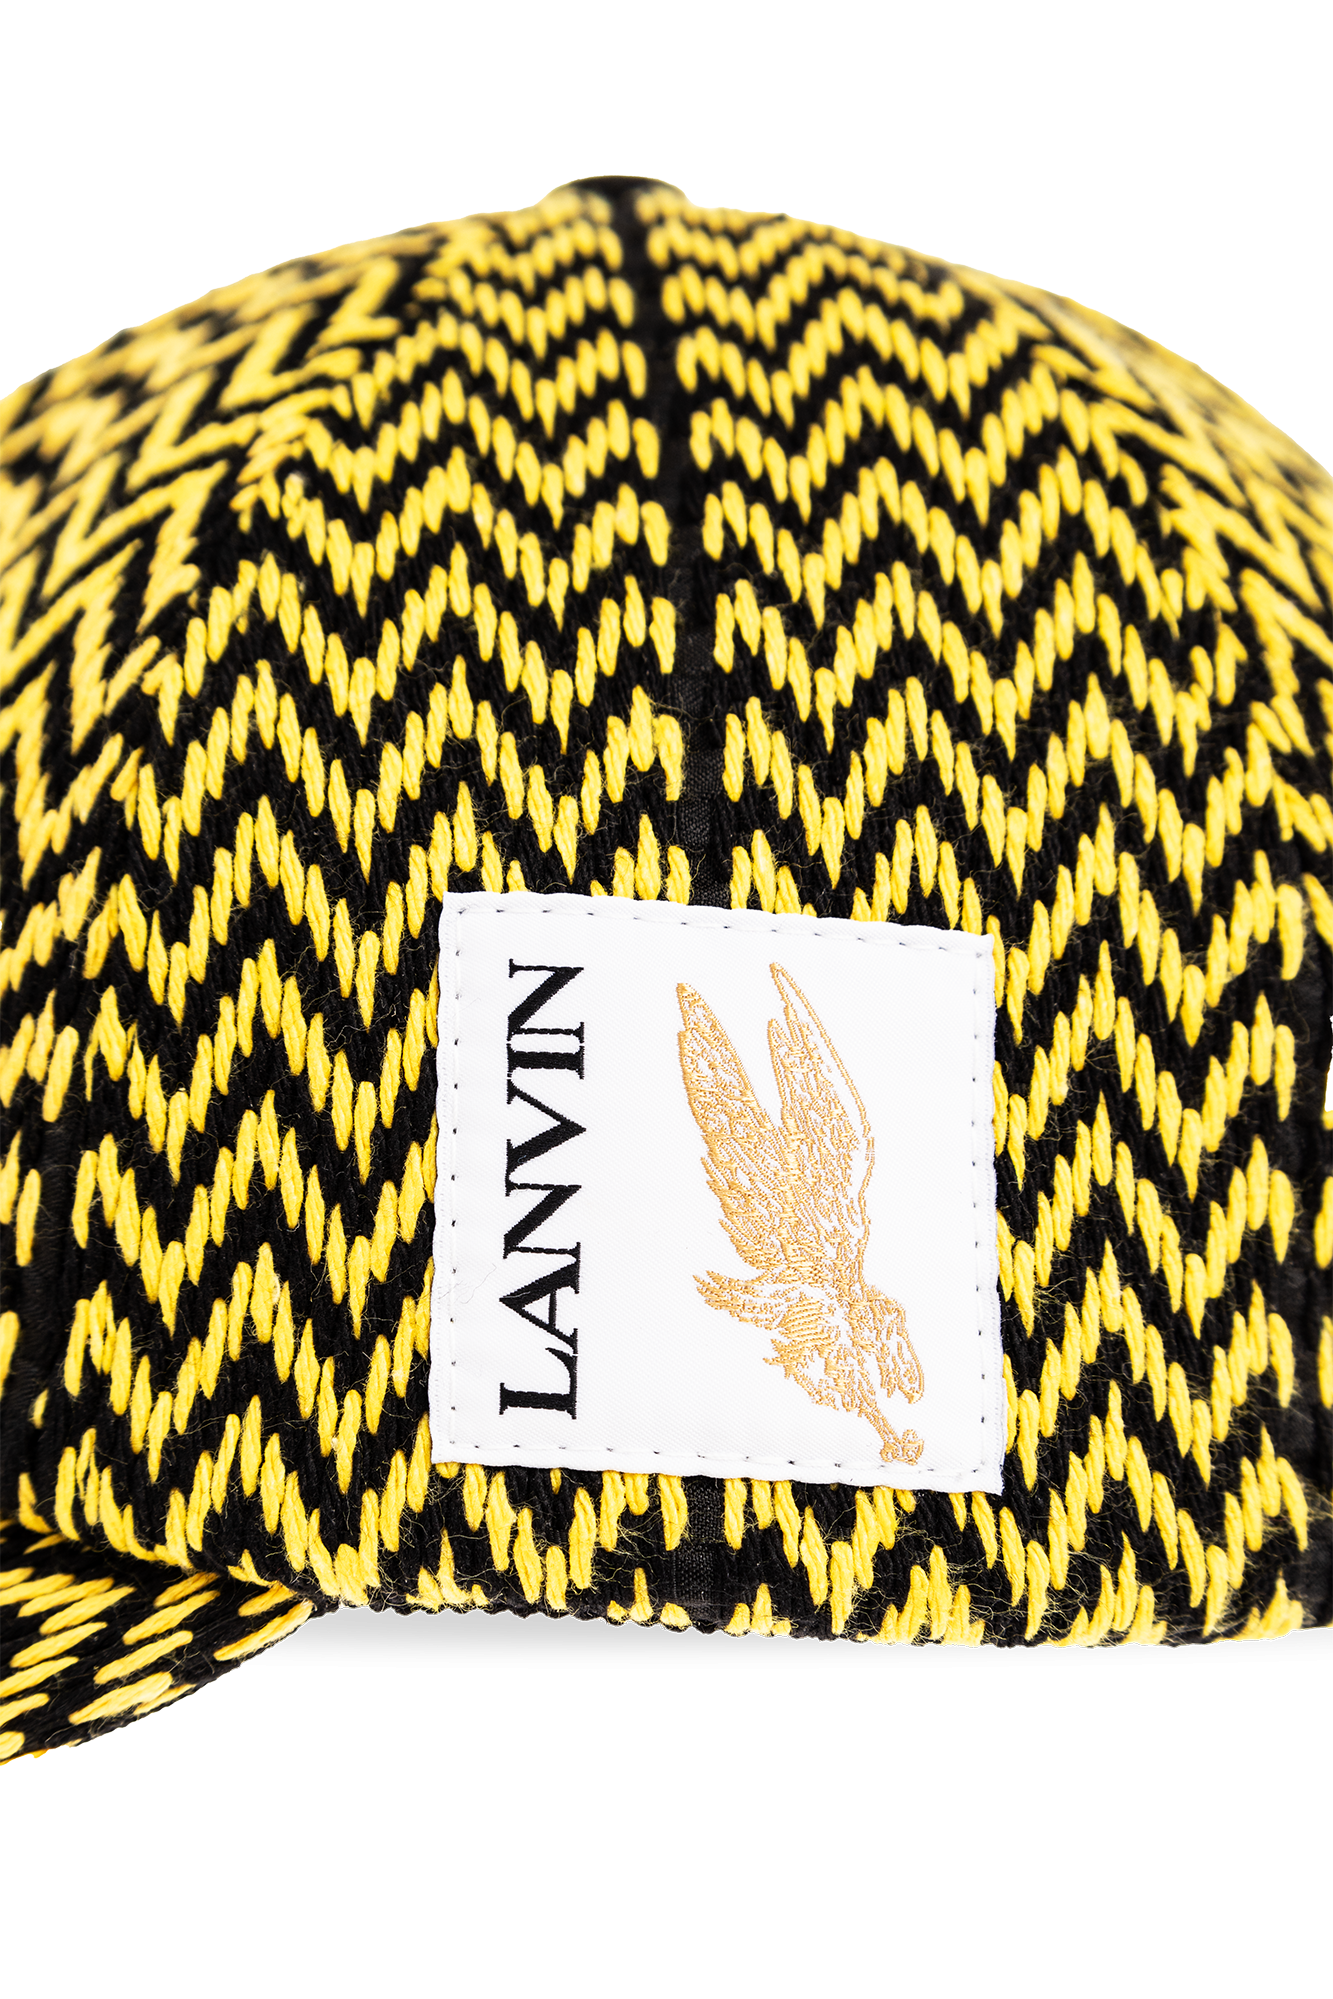 Lanvin Romantic fishermans hat for girls with adjustable drawstring and lace along the edges